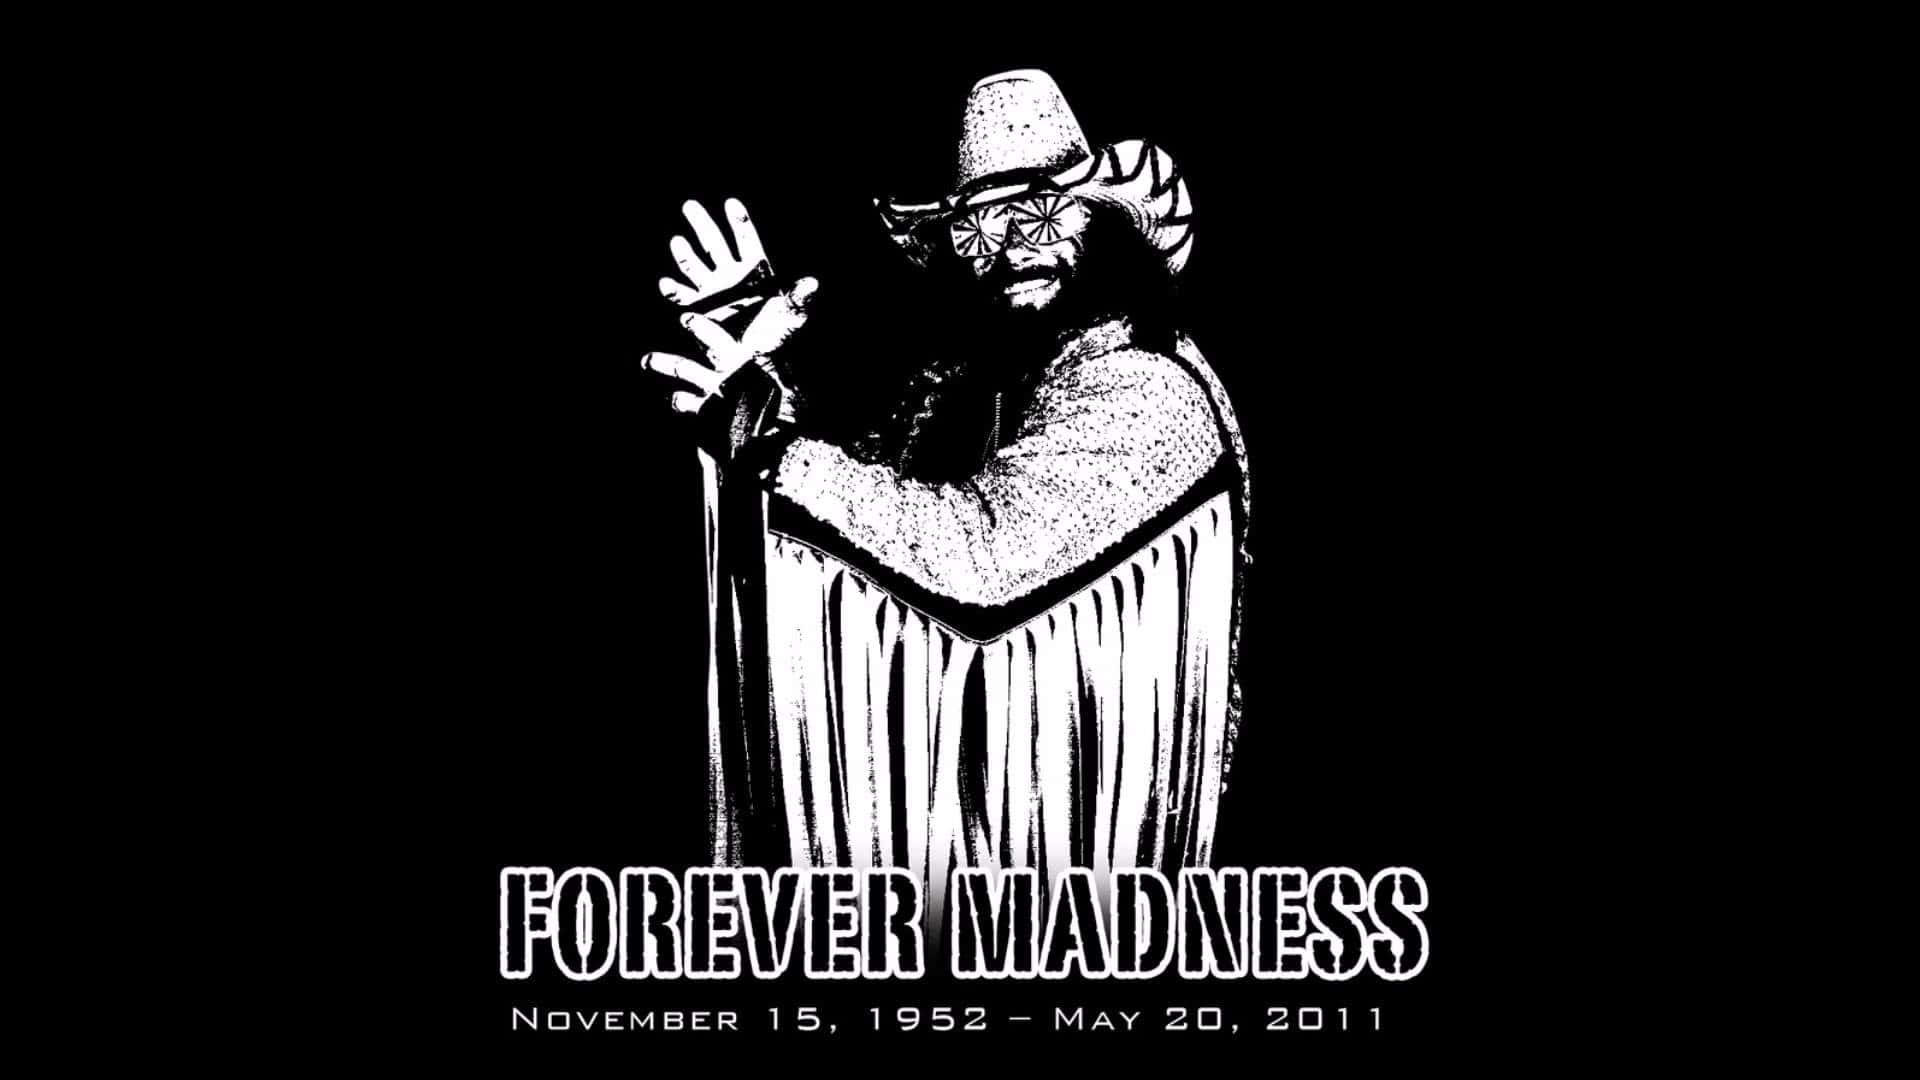 Randy Savage Forever Madness Wallpaper